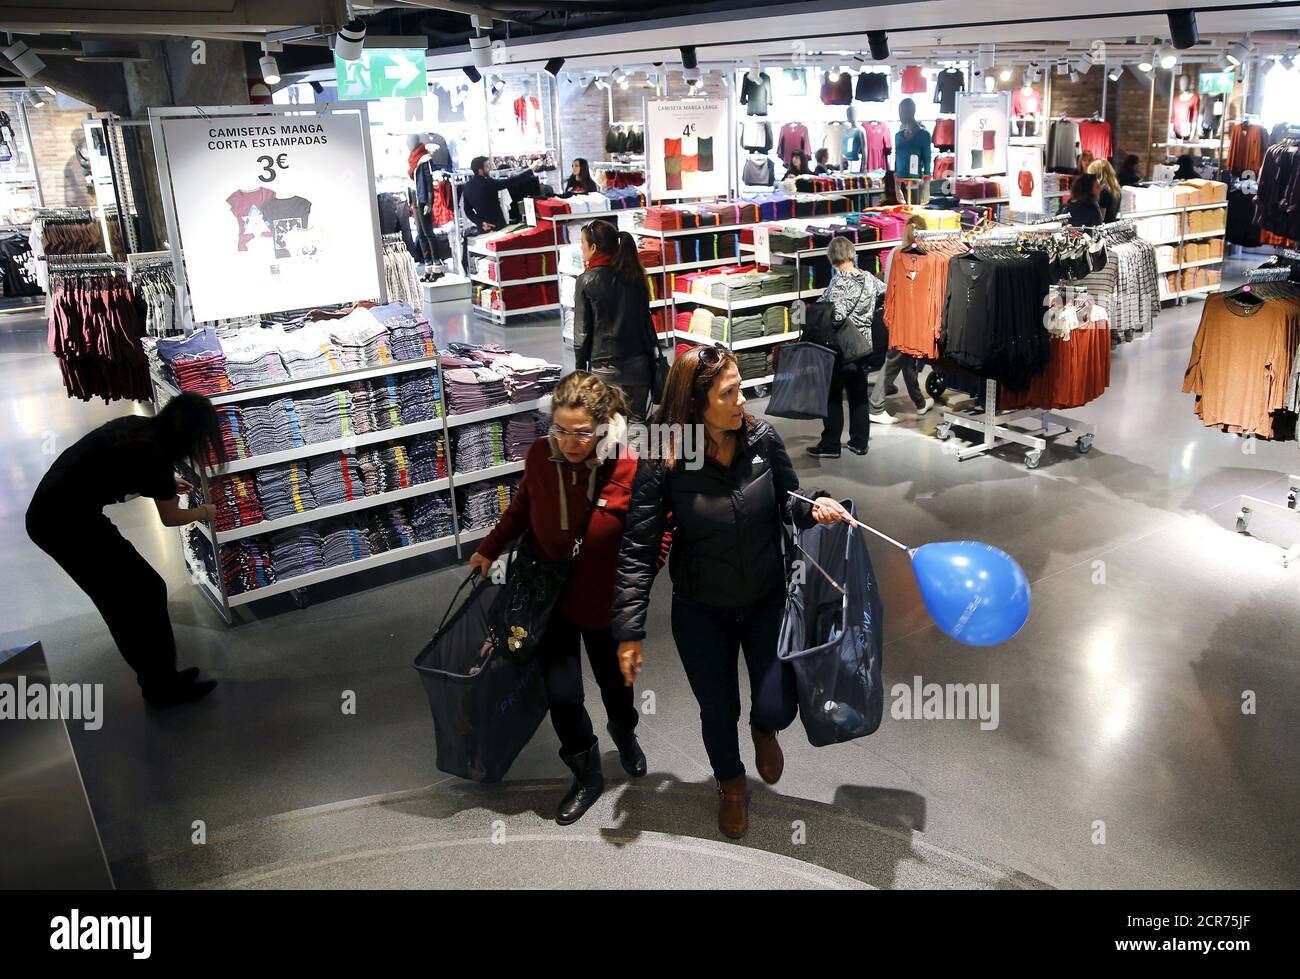 People visit Primark's new Spanish flagship store in Madrid, Spain, October  15, 2015. Primark opened a glitzy new flagship store in Madrid on Thursday,  squarely planting the budget fashion retailer in the